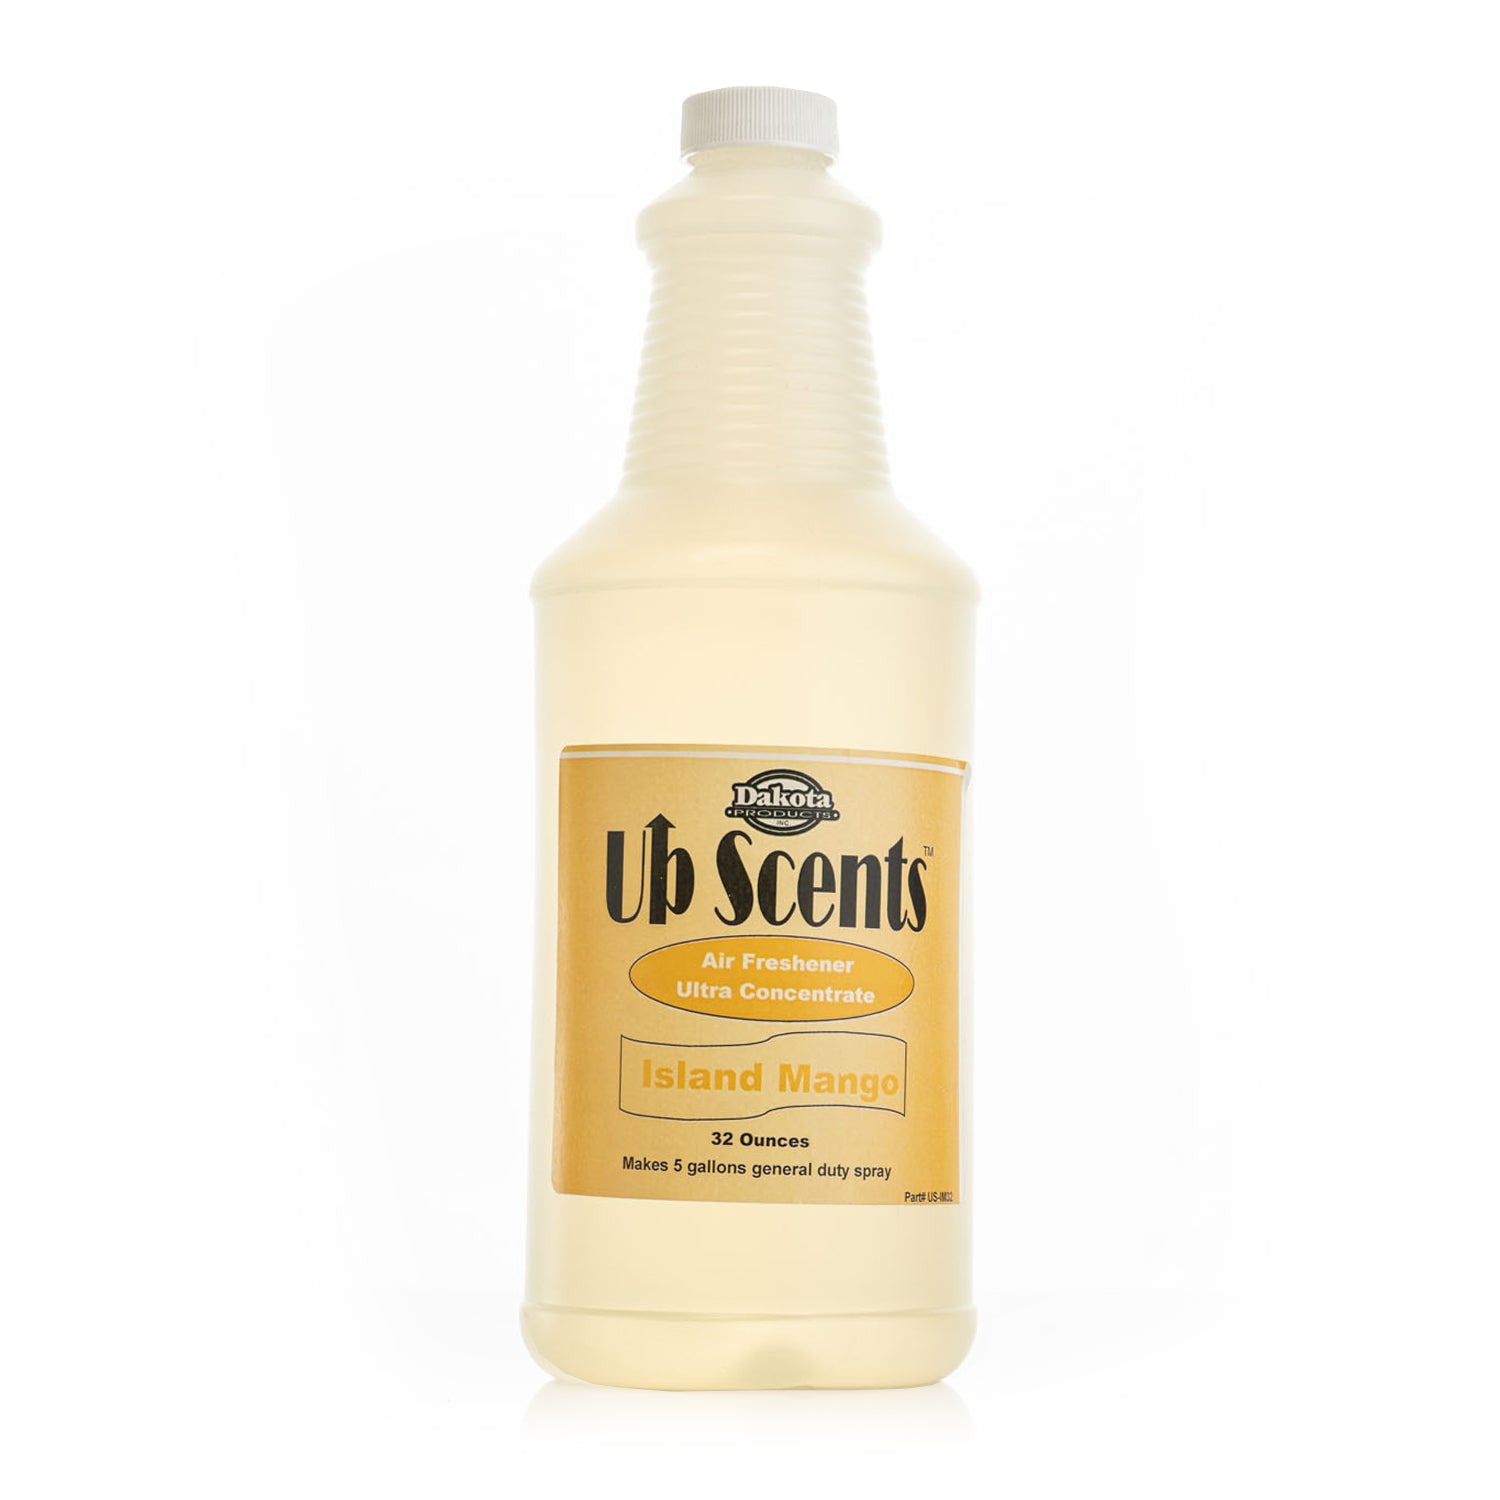 upscents-ultra-concentrated-air-freshener-island-mango